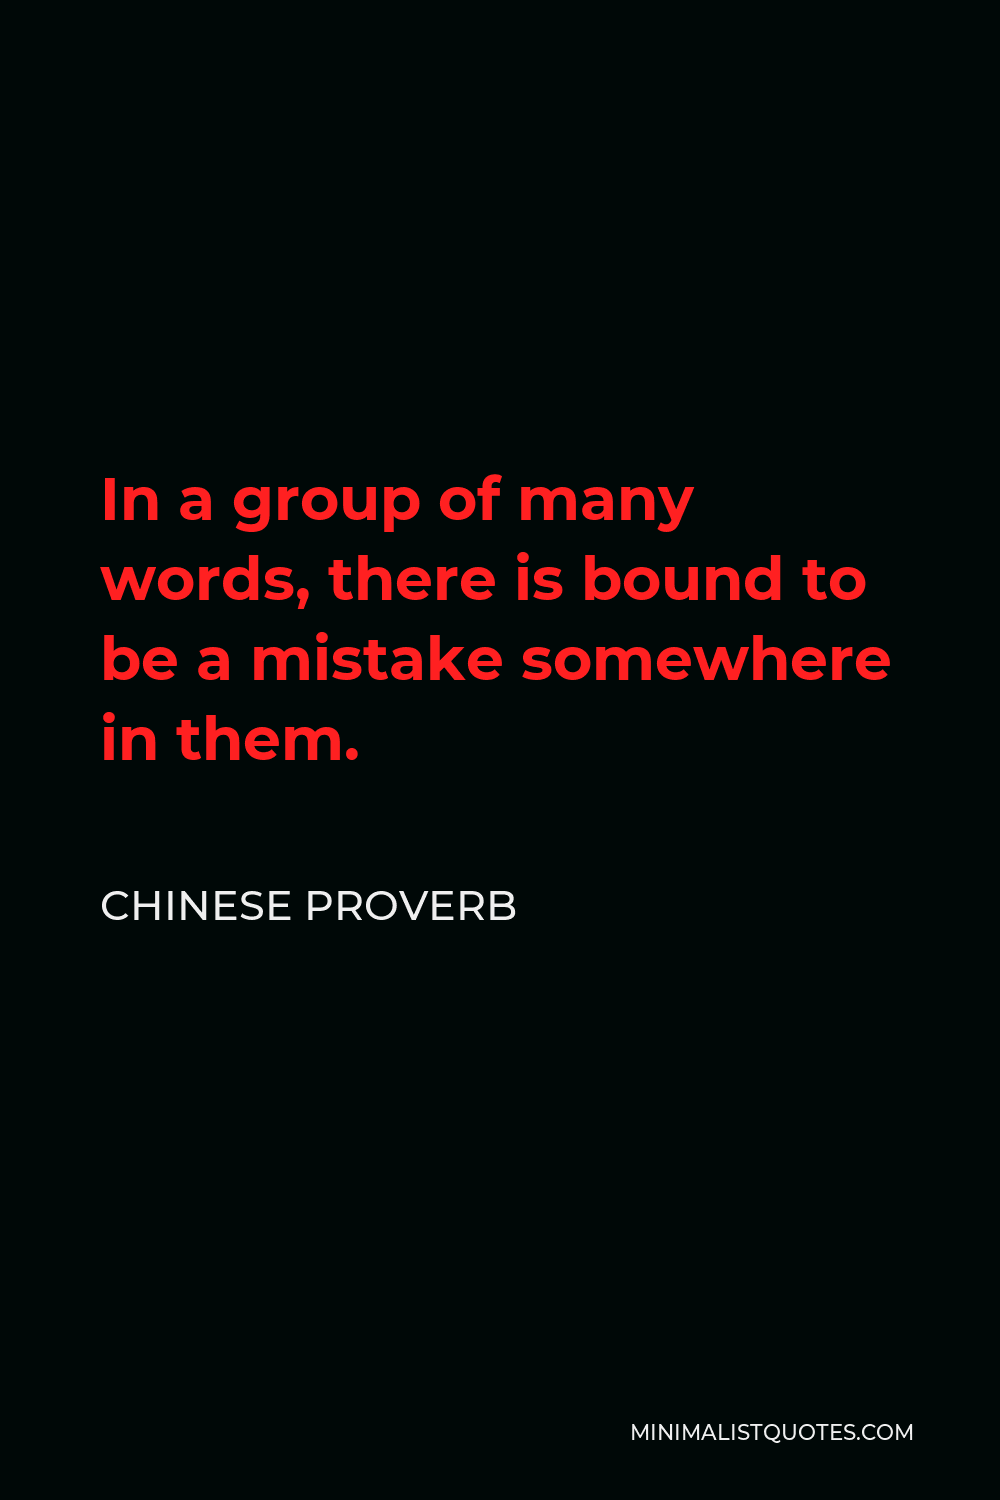 Chinese Proverb Quote - In a group of many words, there is bound to be a mistake somewhere in them.